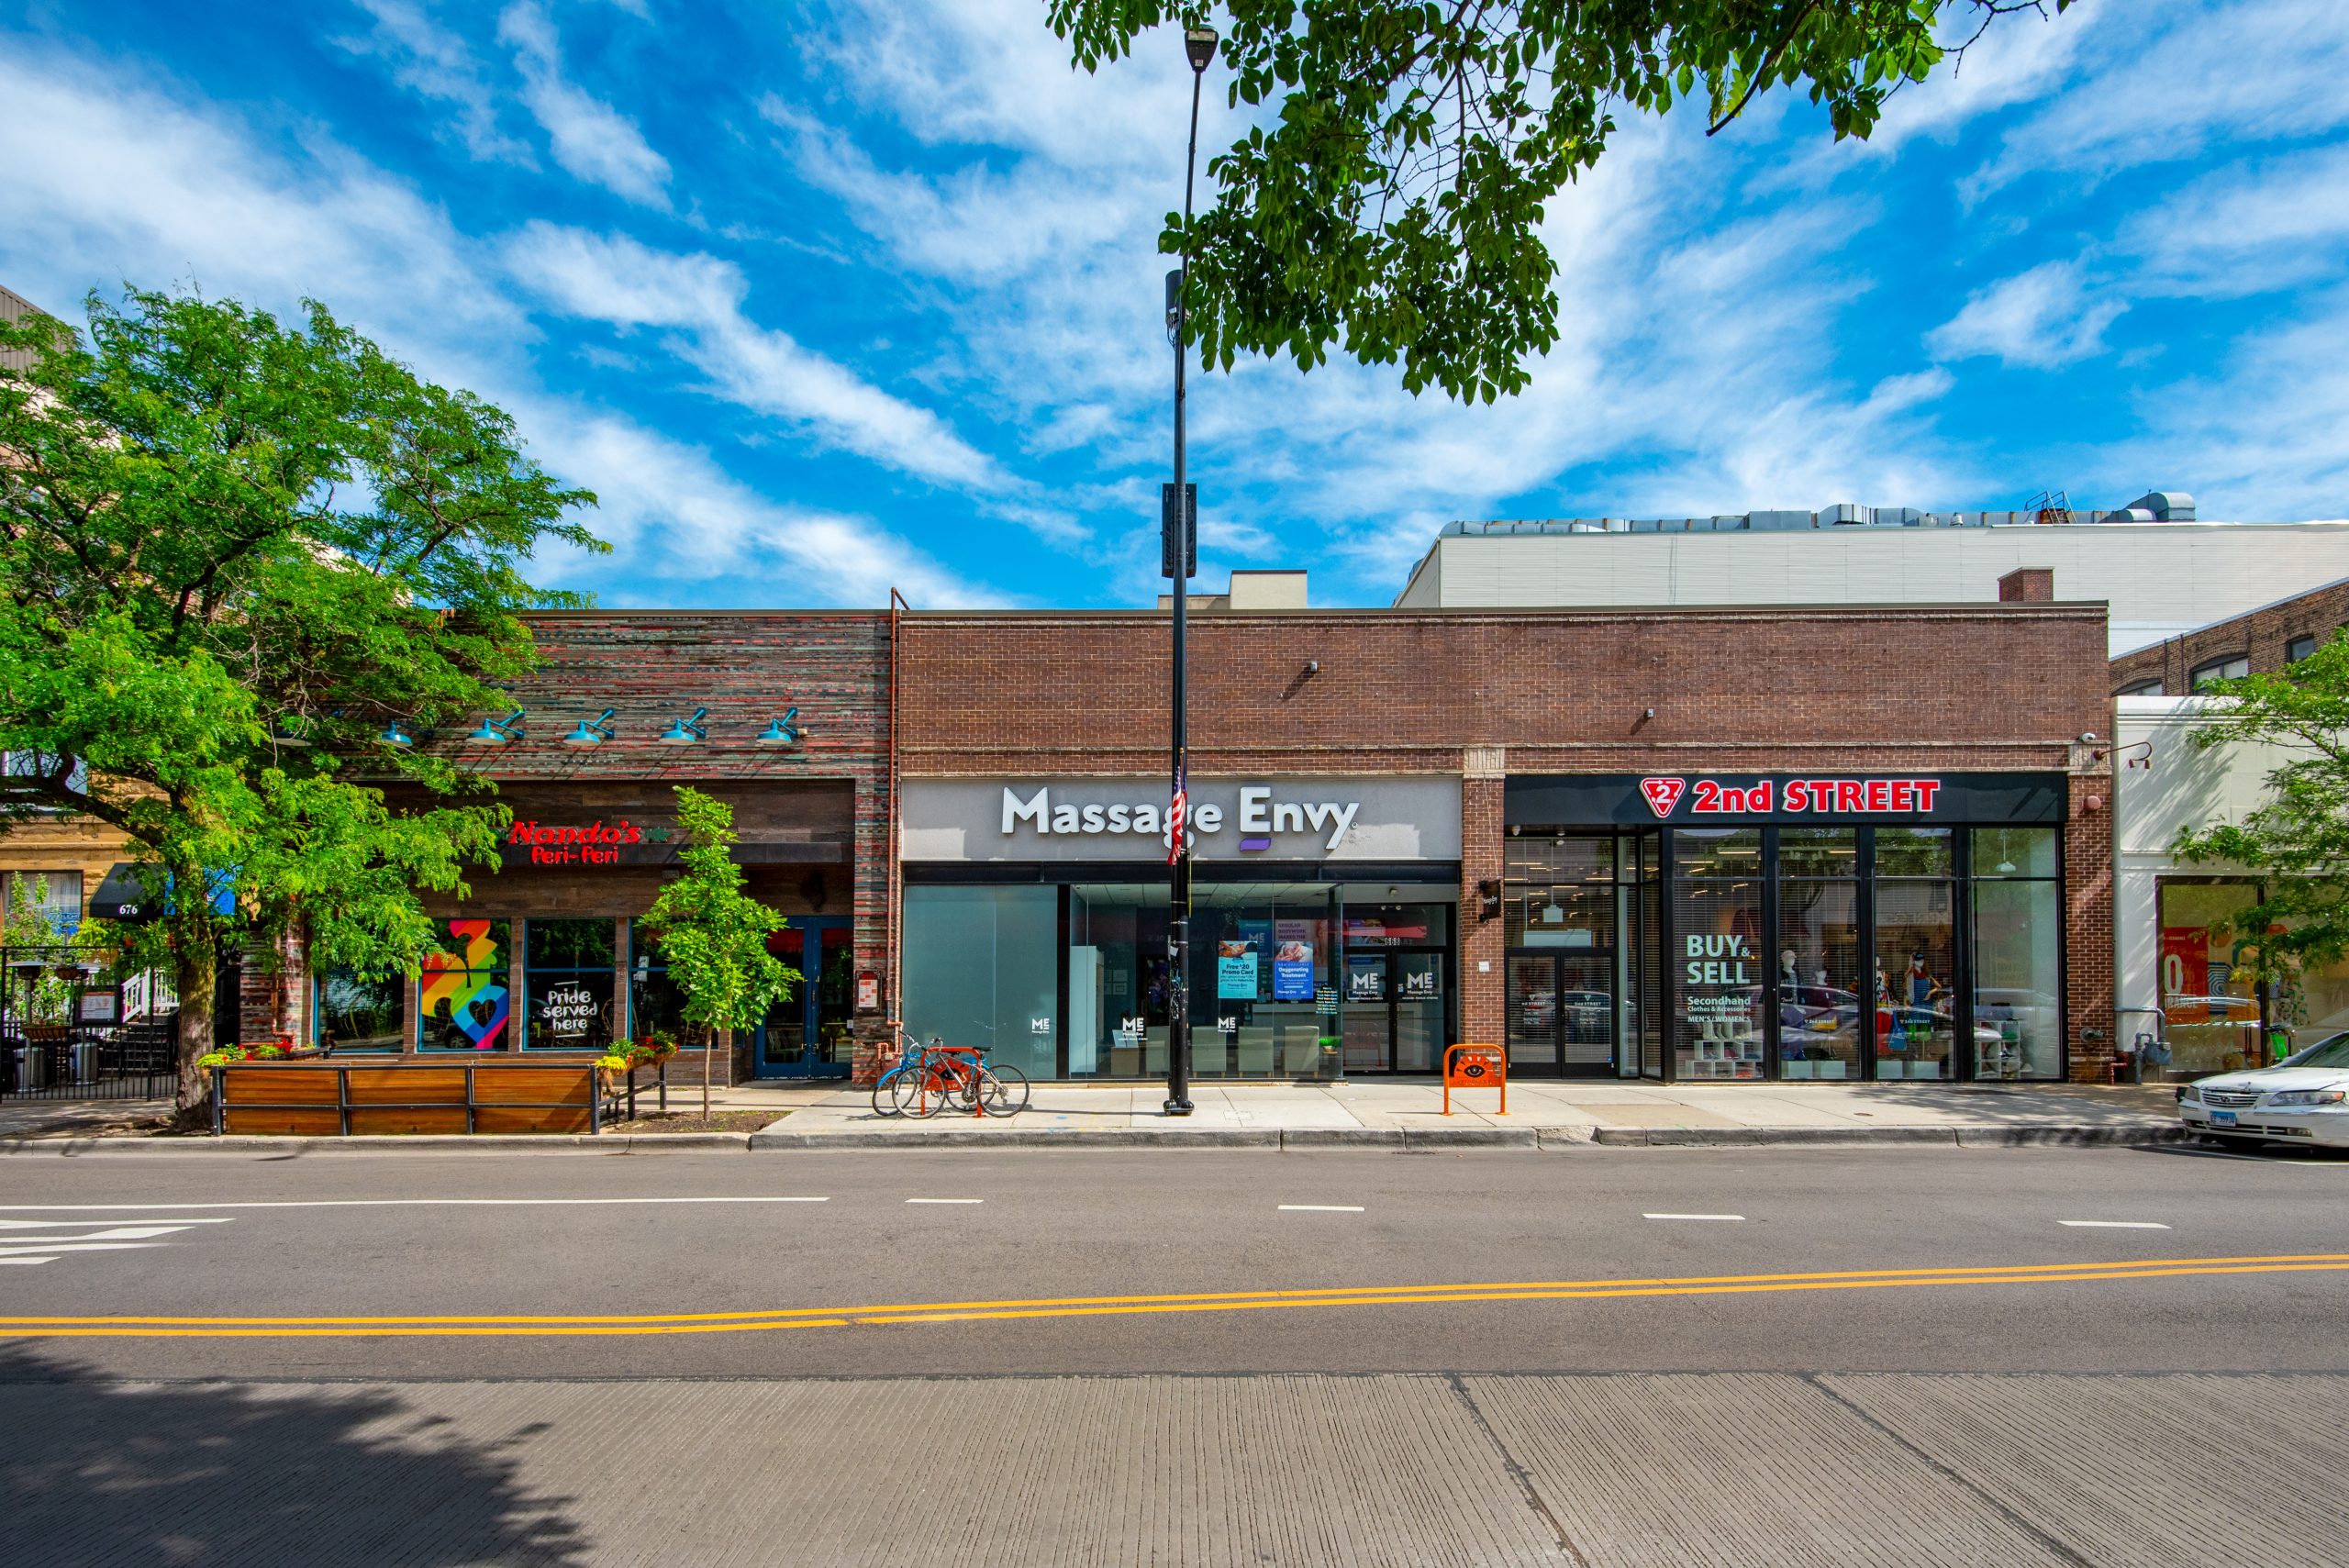 Restaurant/retail space in Lincoln Park